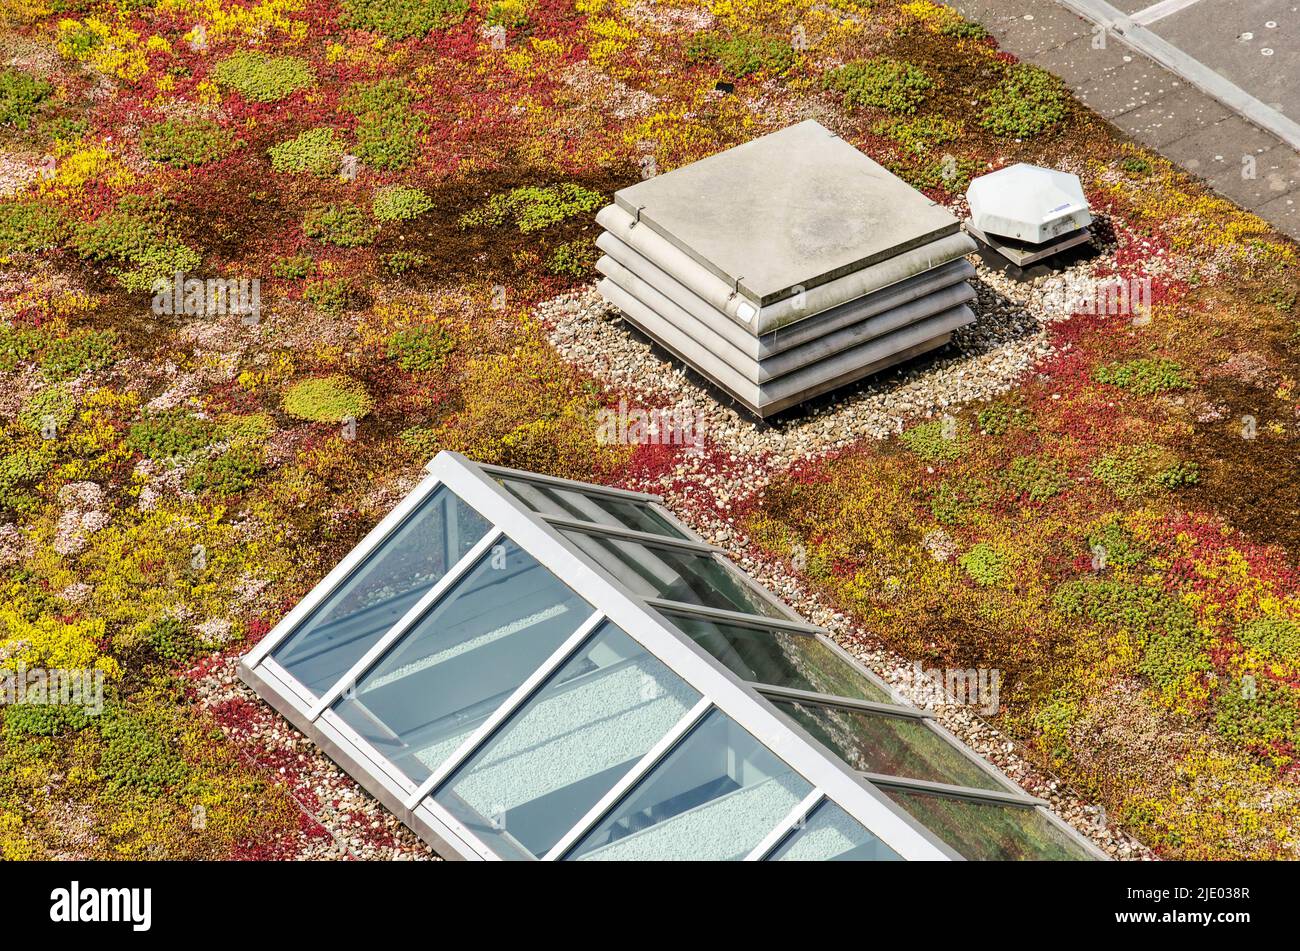 Colorful roof with variants kinds of sedum, a roof light and ventilation machinery Stock Photo